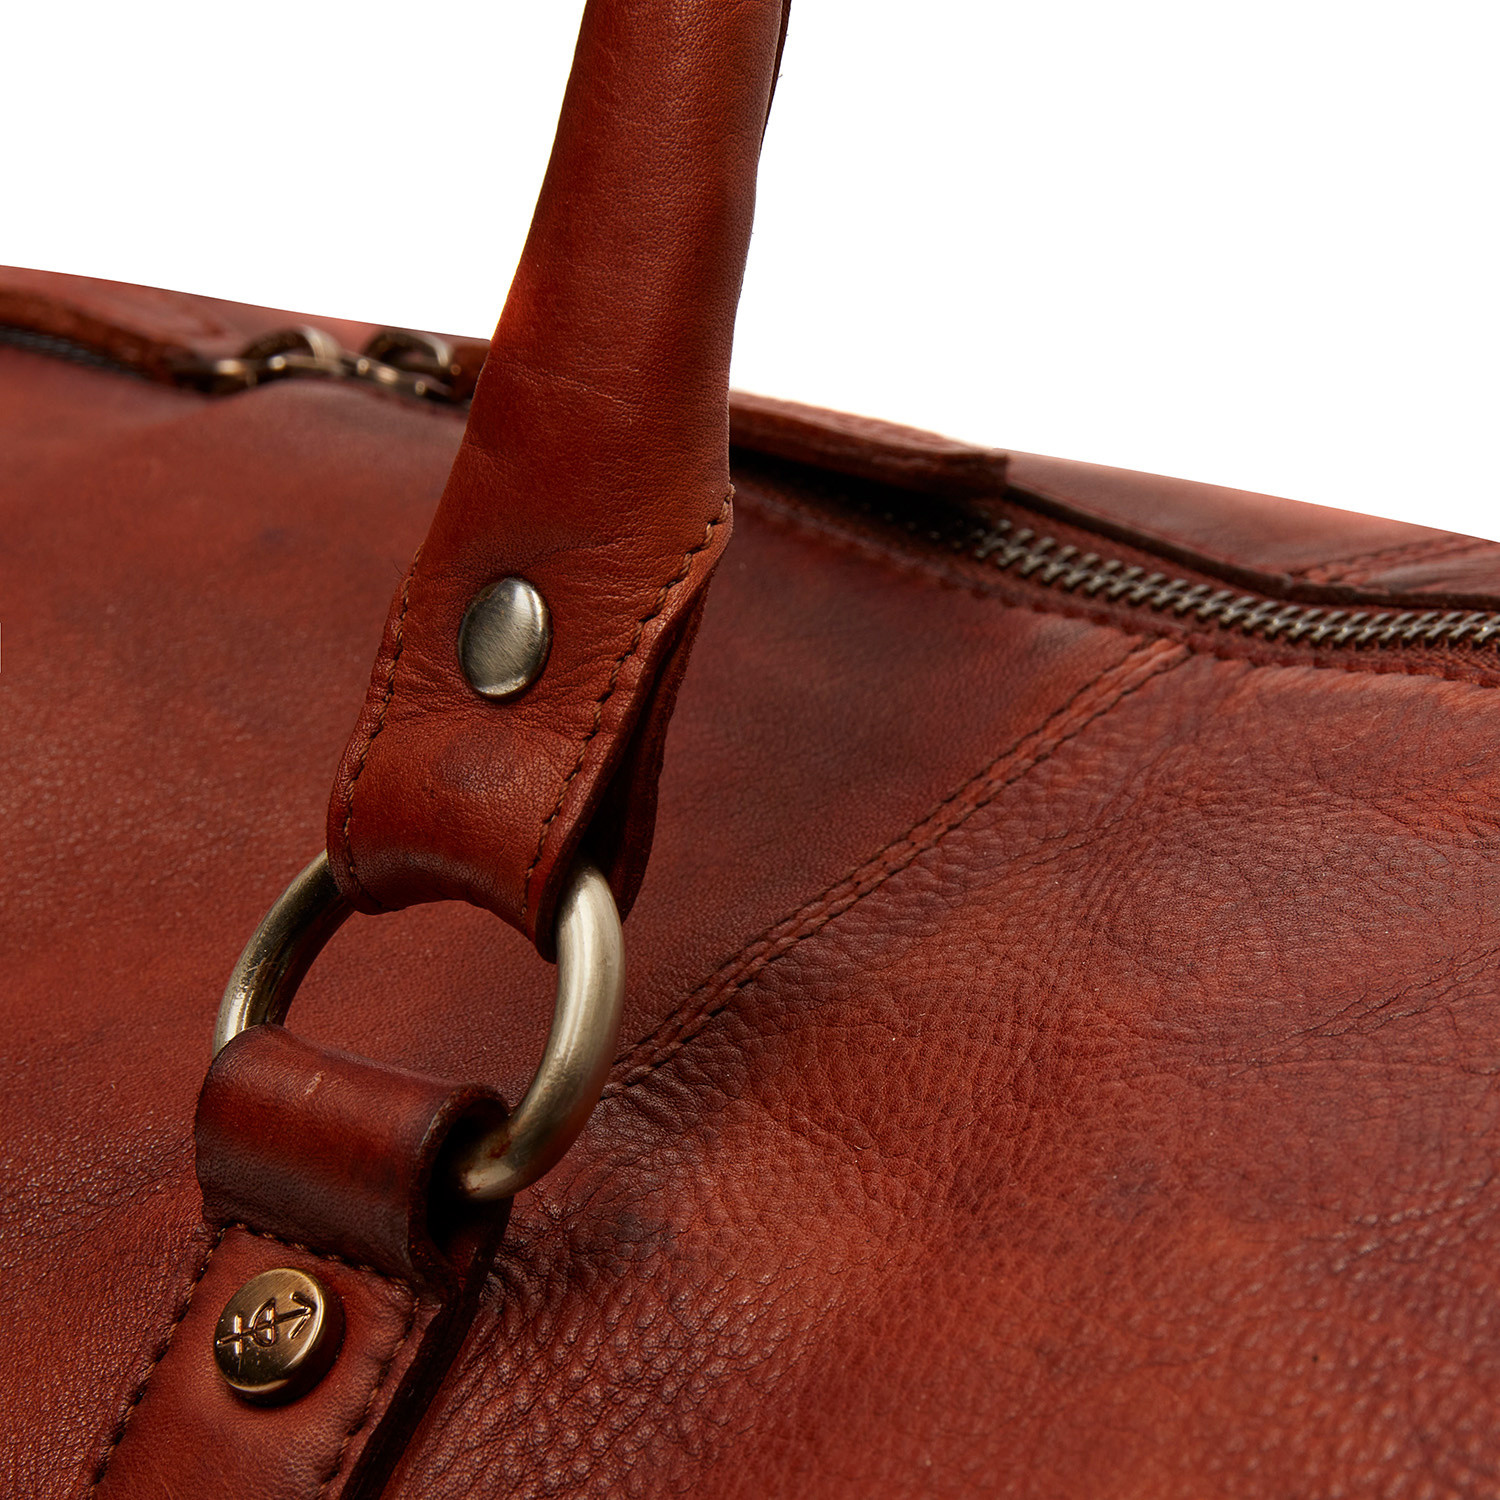 Wide Collection of Quality Weekender Bags – Vintage Leather Sydney